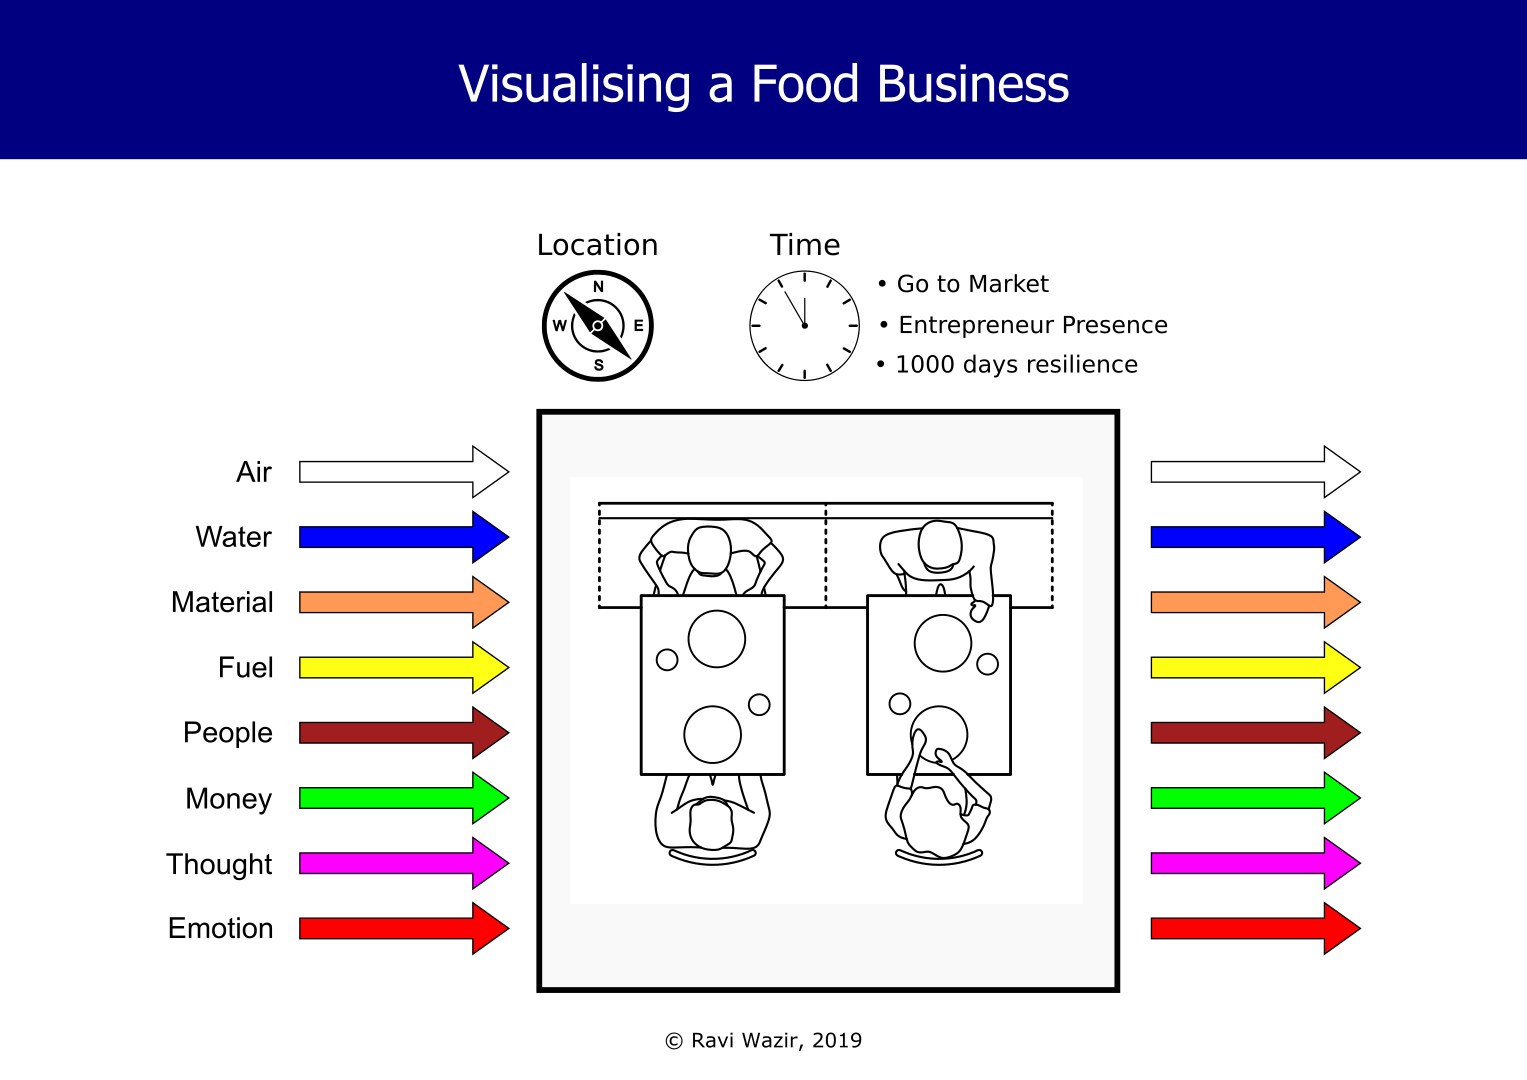 Visualising a Food Business